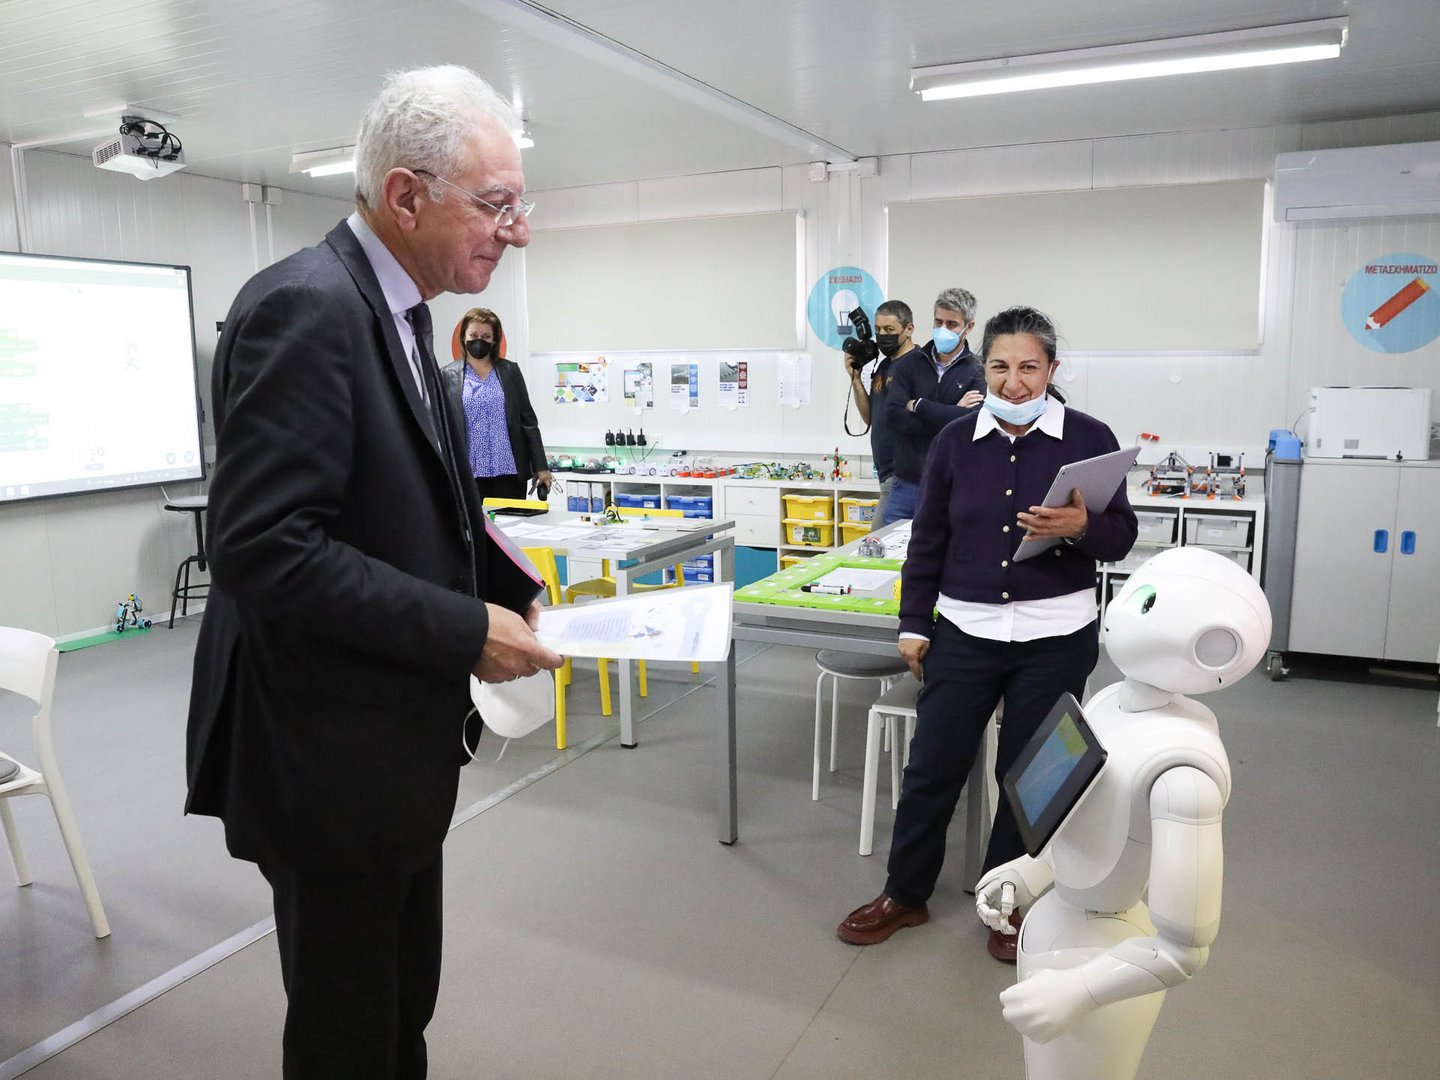 cover Education minister praises tech innovations as he meets robots